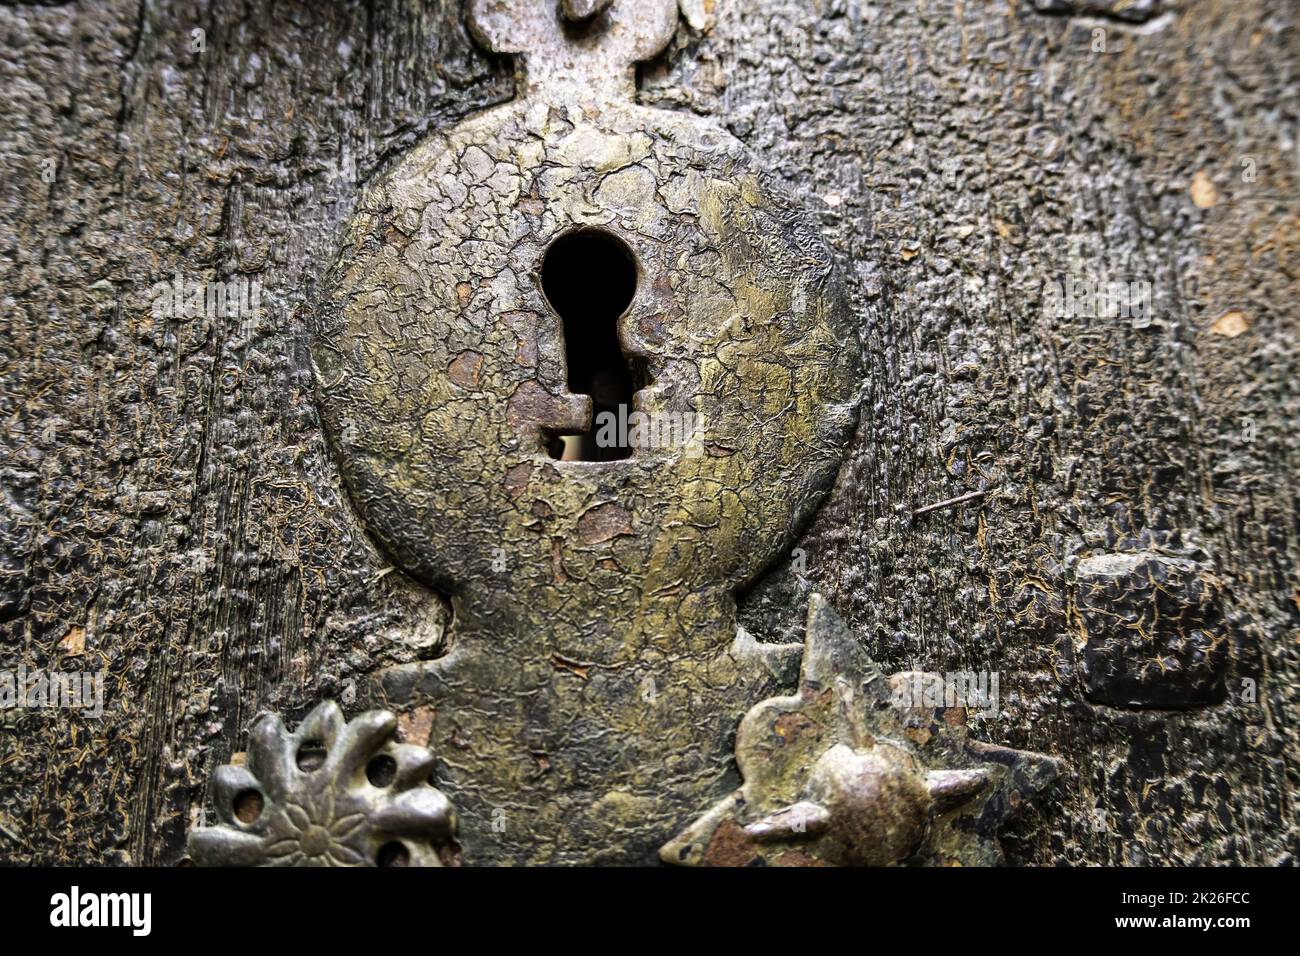 Detail of old lock on an abandoned and ruined door Stock Photo